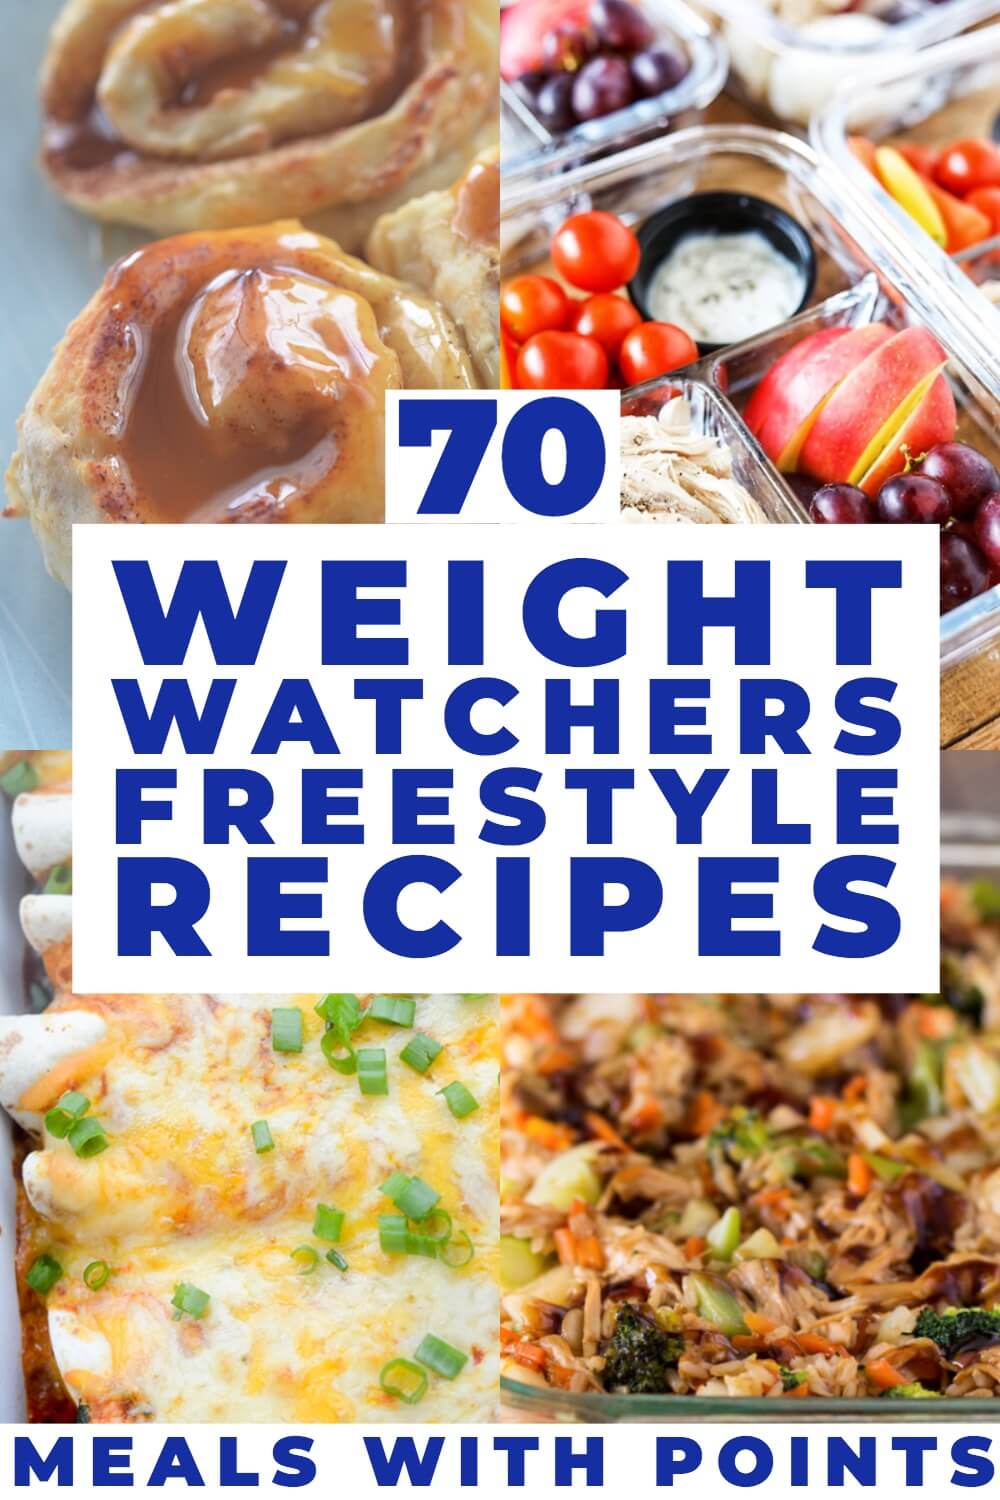 70 Weight Watchers Freestyle Meals With 7 Points Or Less